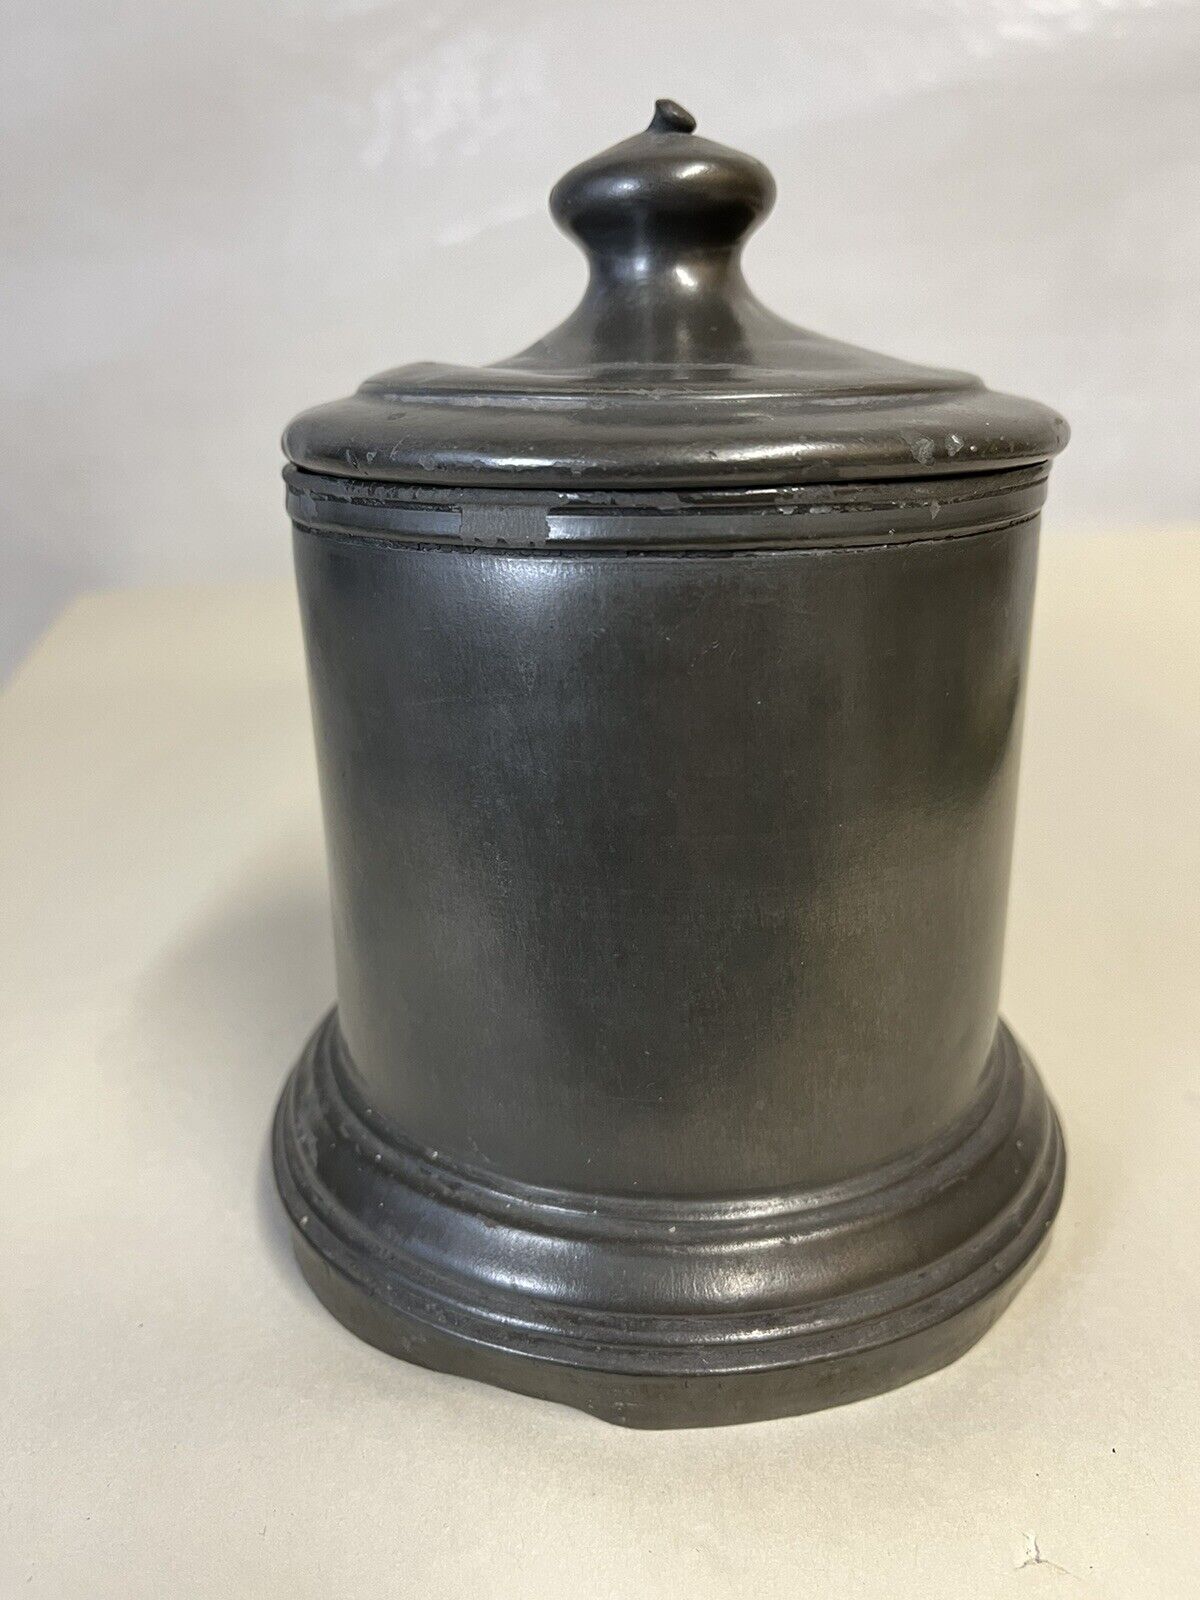 Antique late 18th or early 19th century pewter humidor